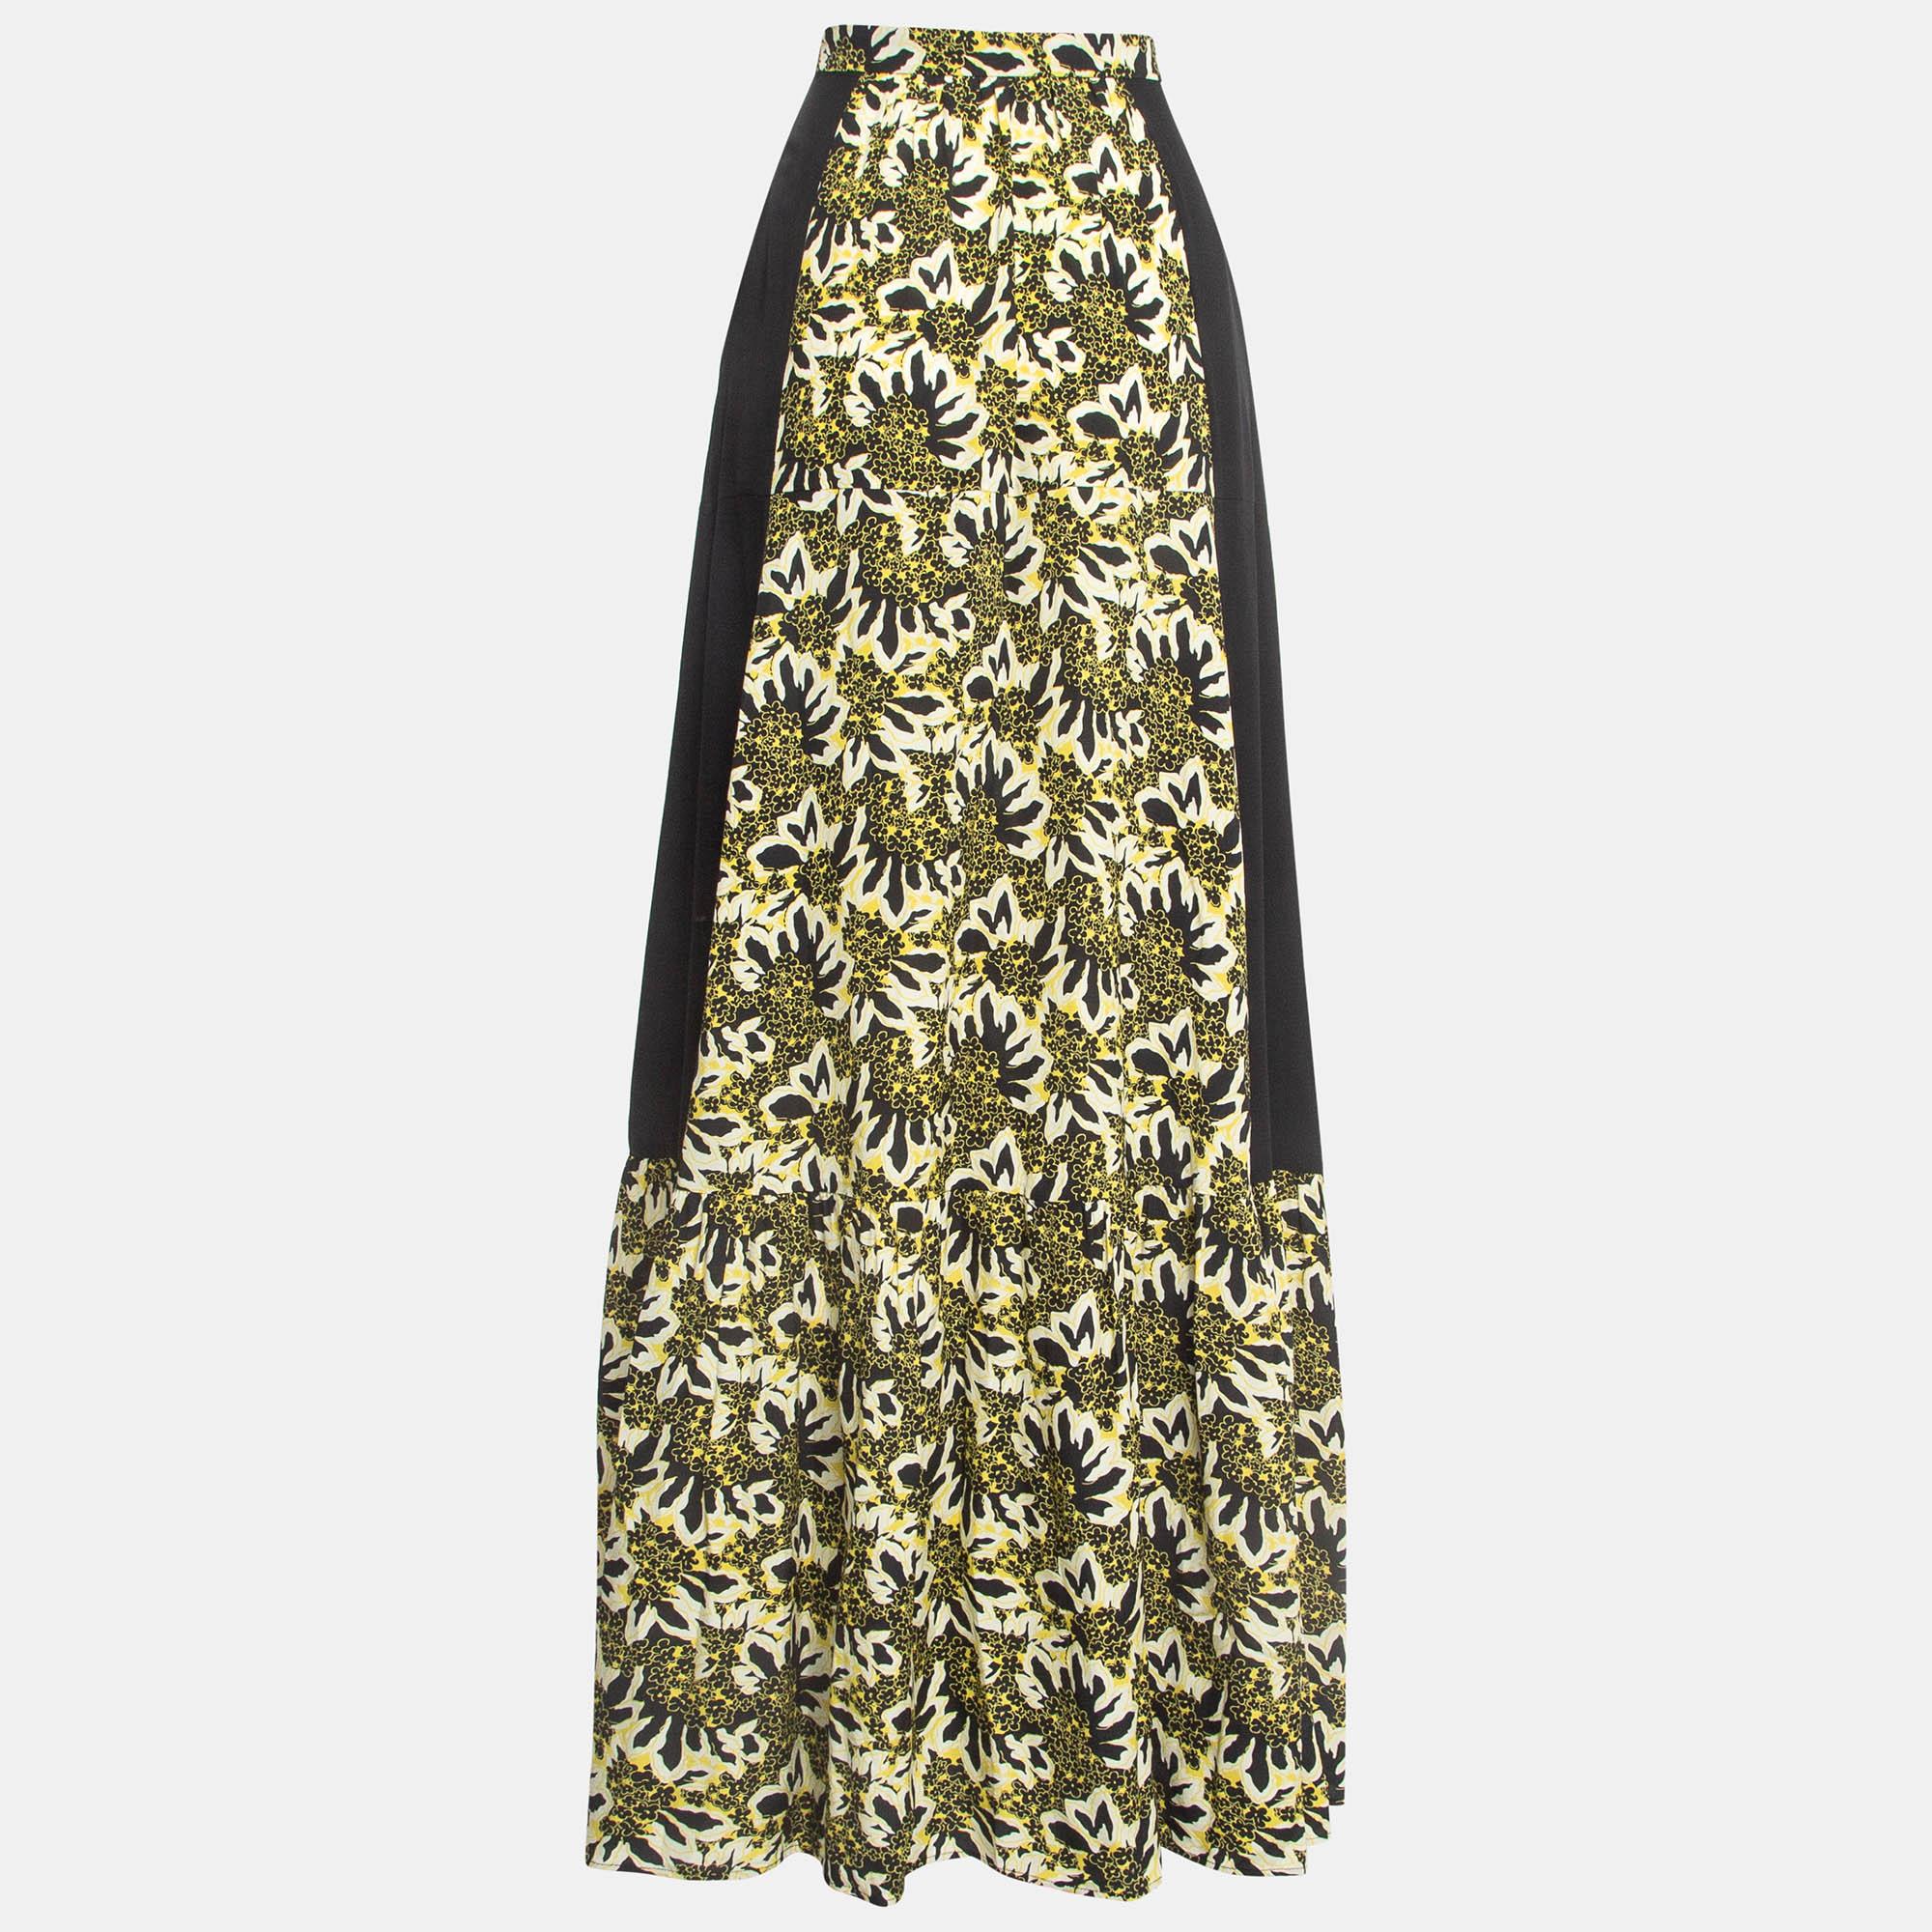 Experience the charm of designer clothing with this gorgeous Etro skirt. Made from quality fabrics, the skirt has a simple allure and a great fit. Pair it up with a tailored blouse or a simple top and high heels.

Includes: Tag